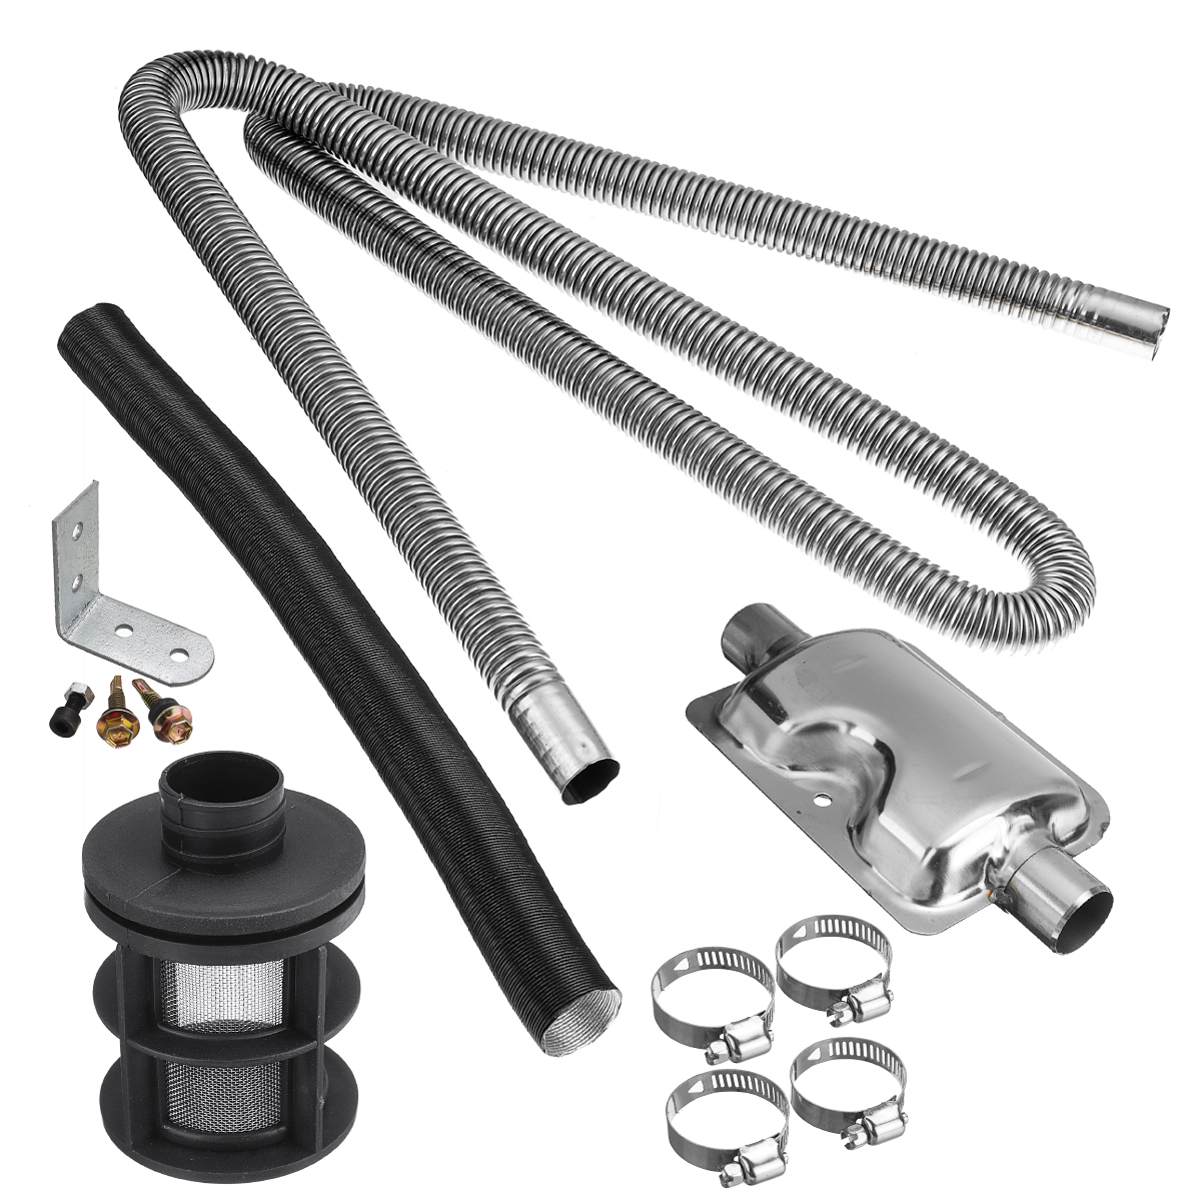 Stainless-Exhaust-Muffler-Silencer-Clamps-Bracket-Gas-Vent-Hose-Portable-180cm-Pipe-Silence-For-Air--1695770-5